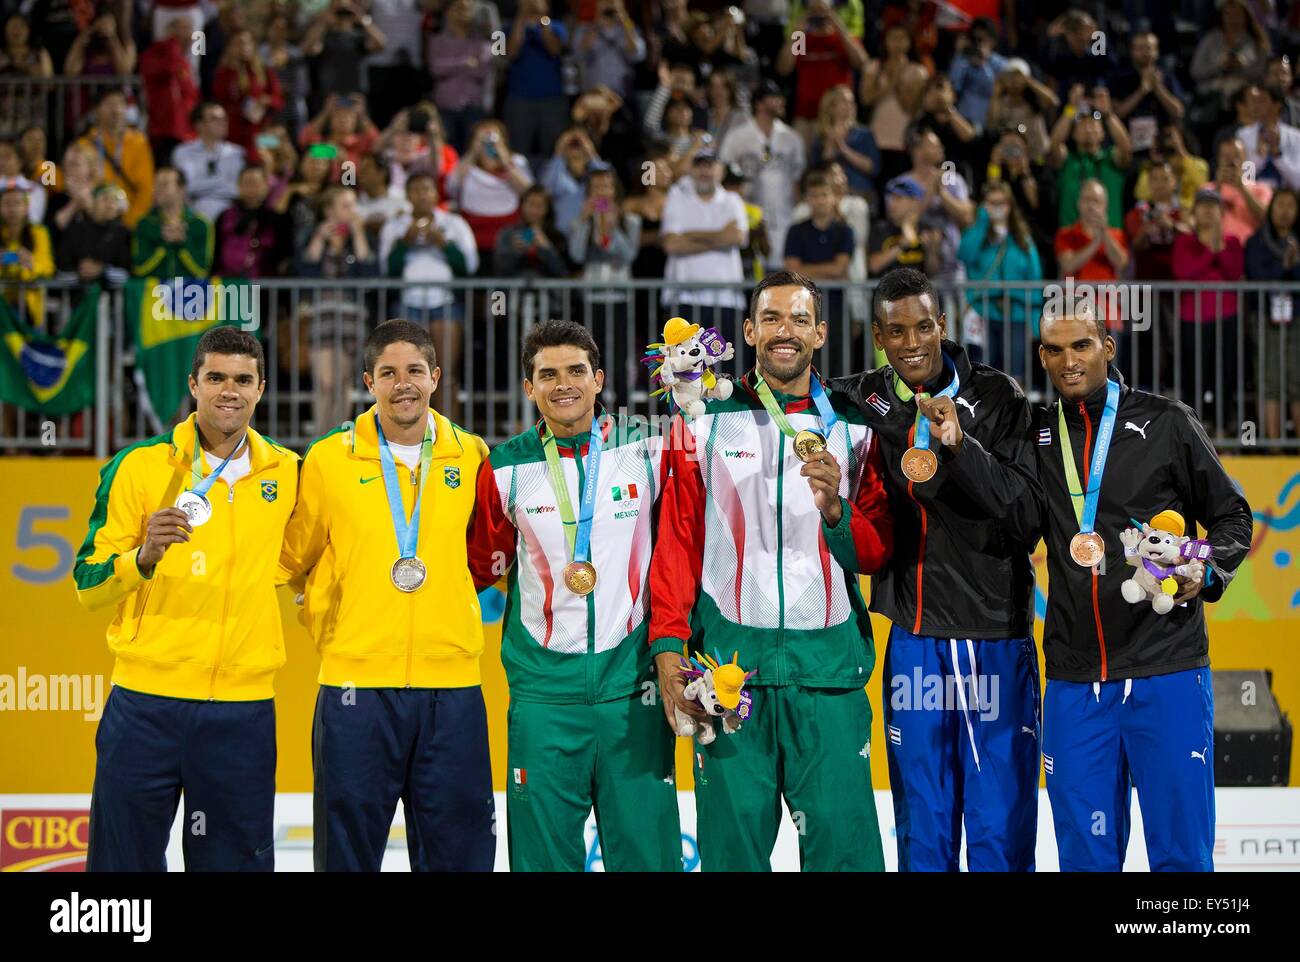 (150722) -- TORONTO, July 22, 2015 (Xinhua) -- Gold medalists Juan Virgen (3rd, R) and Rodolfo Ontiveros(3rd, L) of Mexico pose with silver medalists Vitor Araujo (1st, L) and Alvaro Magliano (2nd, L) of Brazil, and bronze medalists Nivaldo Diaz (2nd, R) and Sergio Gonzalez (1st, R) of Cuba during the awarding ceremony for Men's Beach Volleyball at the 17th Pan American Games in Toronto, Canada on July 21, 2015. Juan Virgen and Rodolfo Ontiveros claimed the title after defeating Vitor Araujo and Alvaro Magliano of Brazil with 2-1 in the gold medal match. (Xinhua/Zou Zheng)(wll) Stock Photo